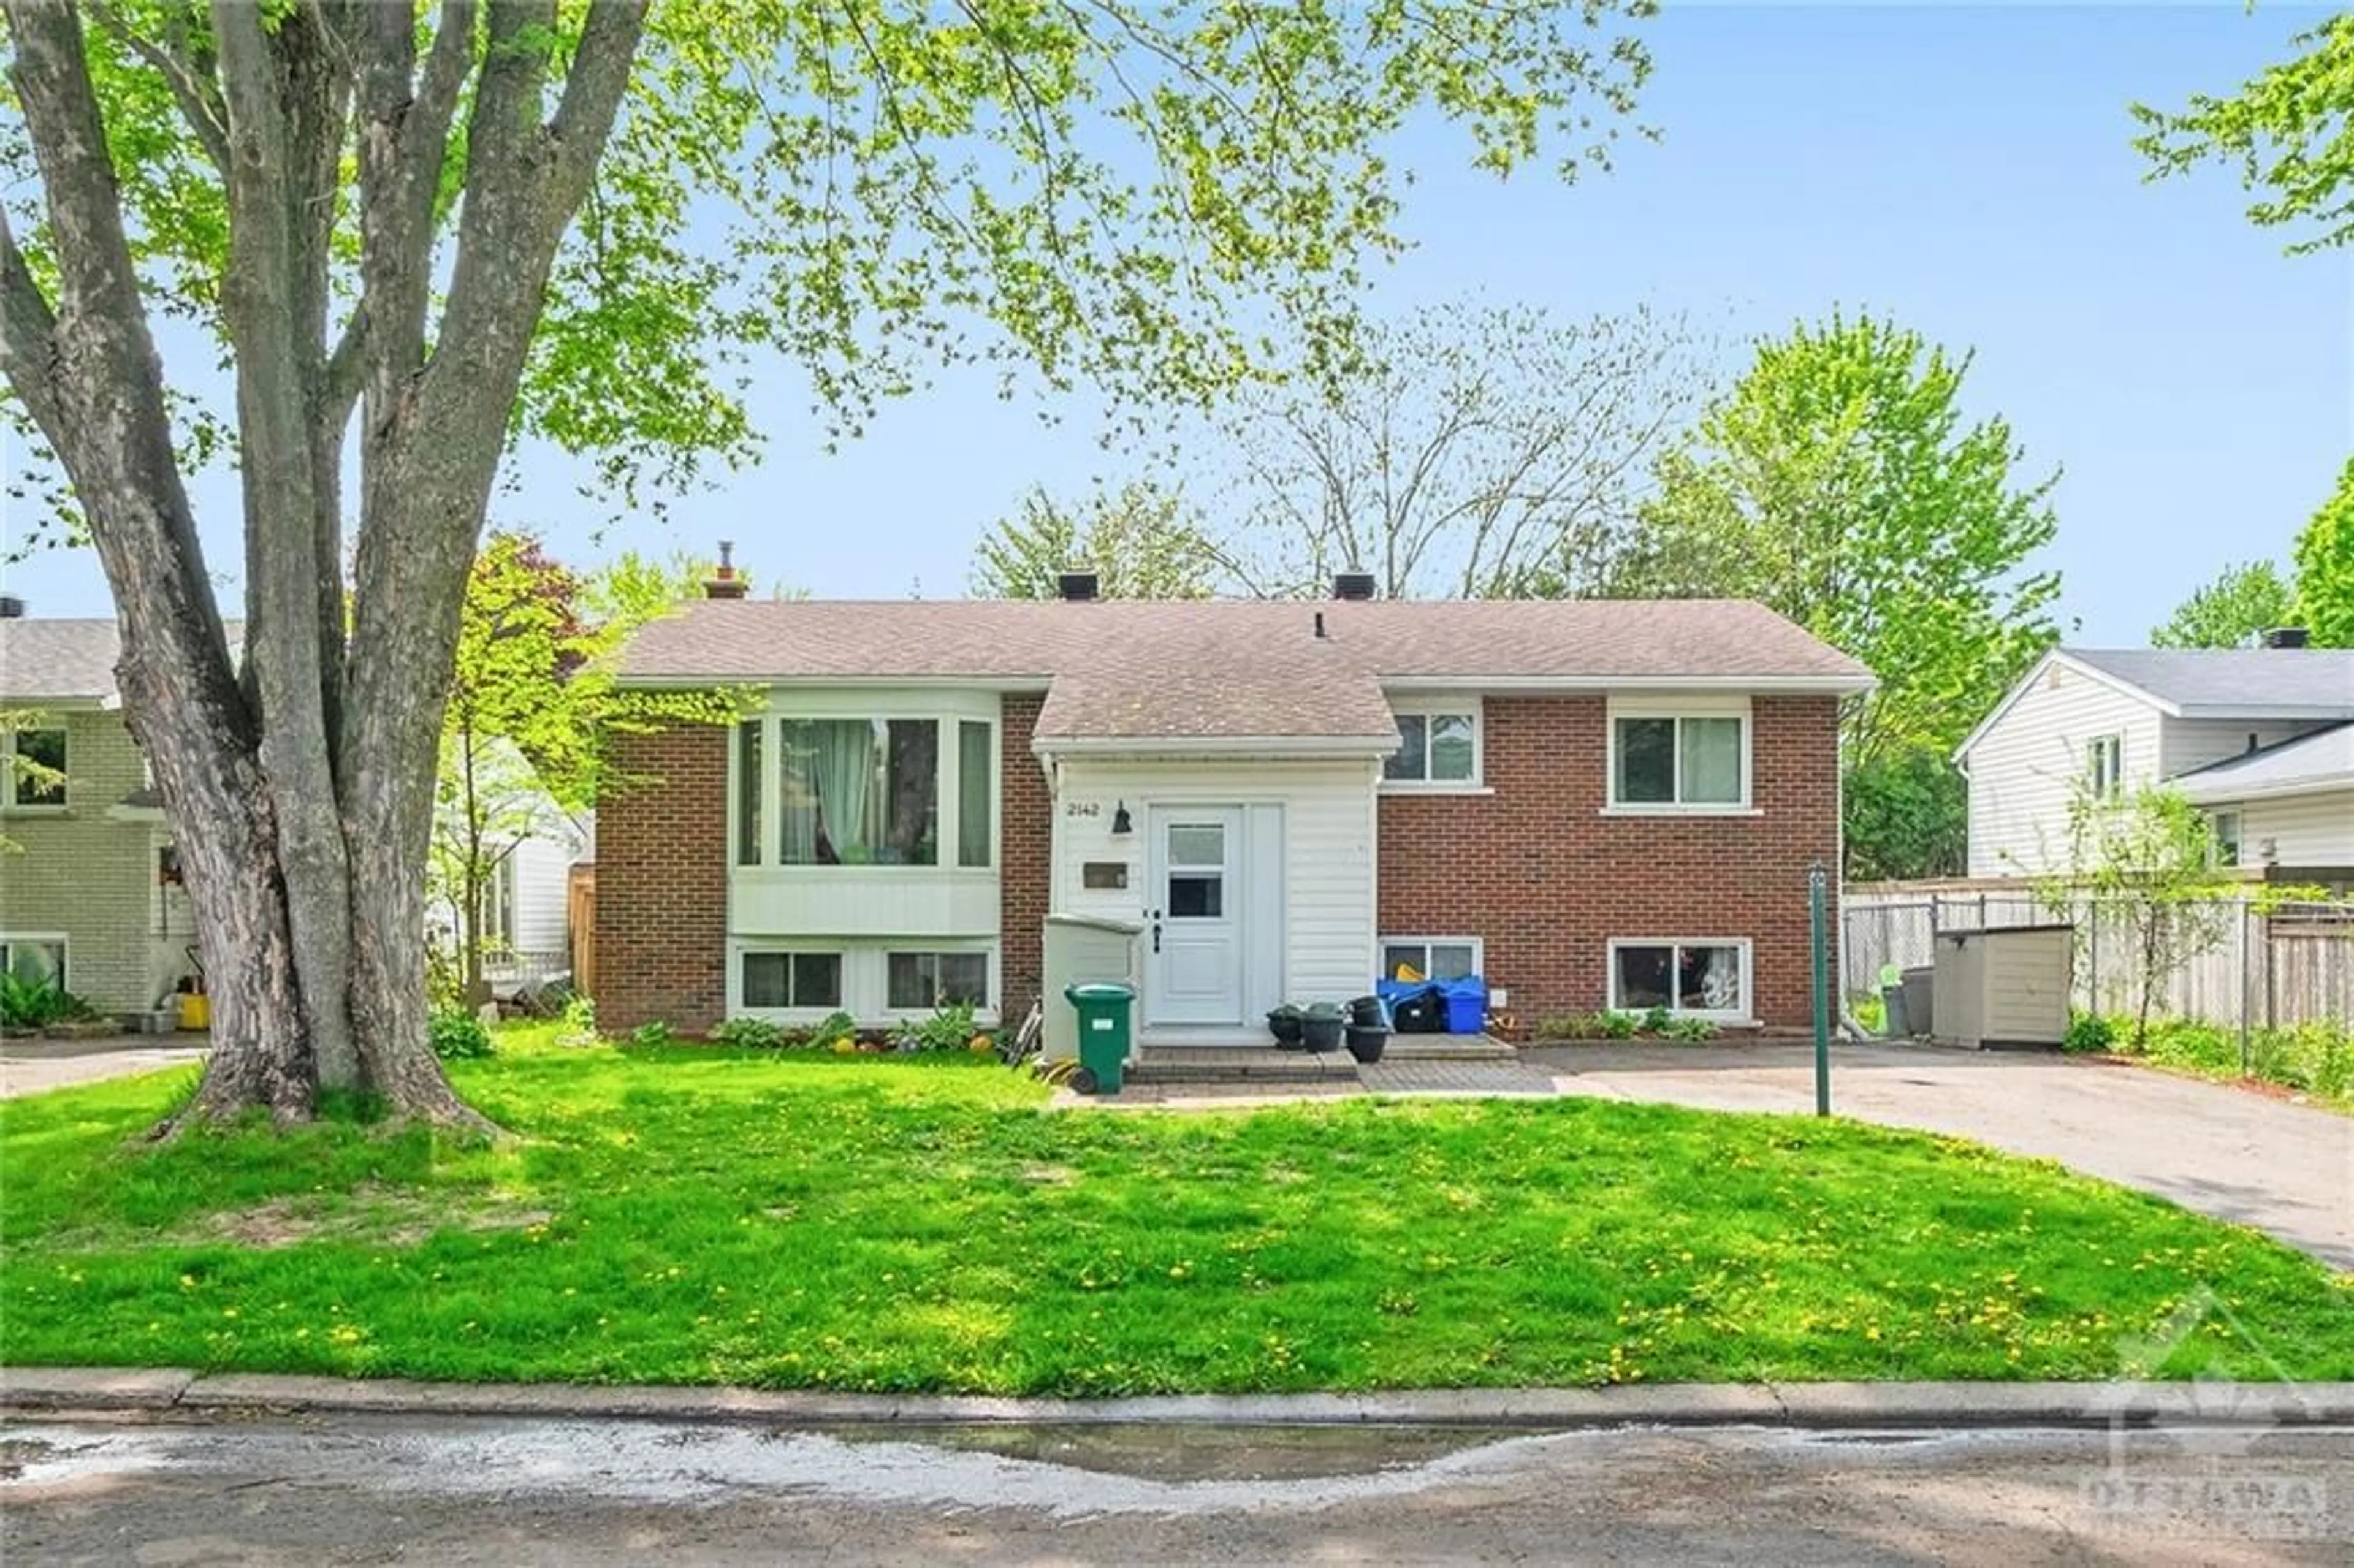 Home with brick exterior material for 2142 MONSON Ave, Ottawa Ontario K1J 6A8